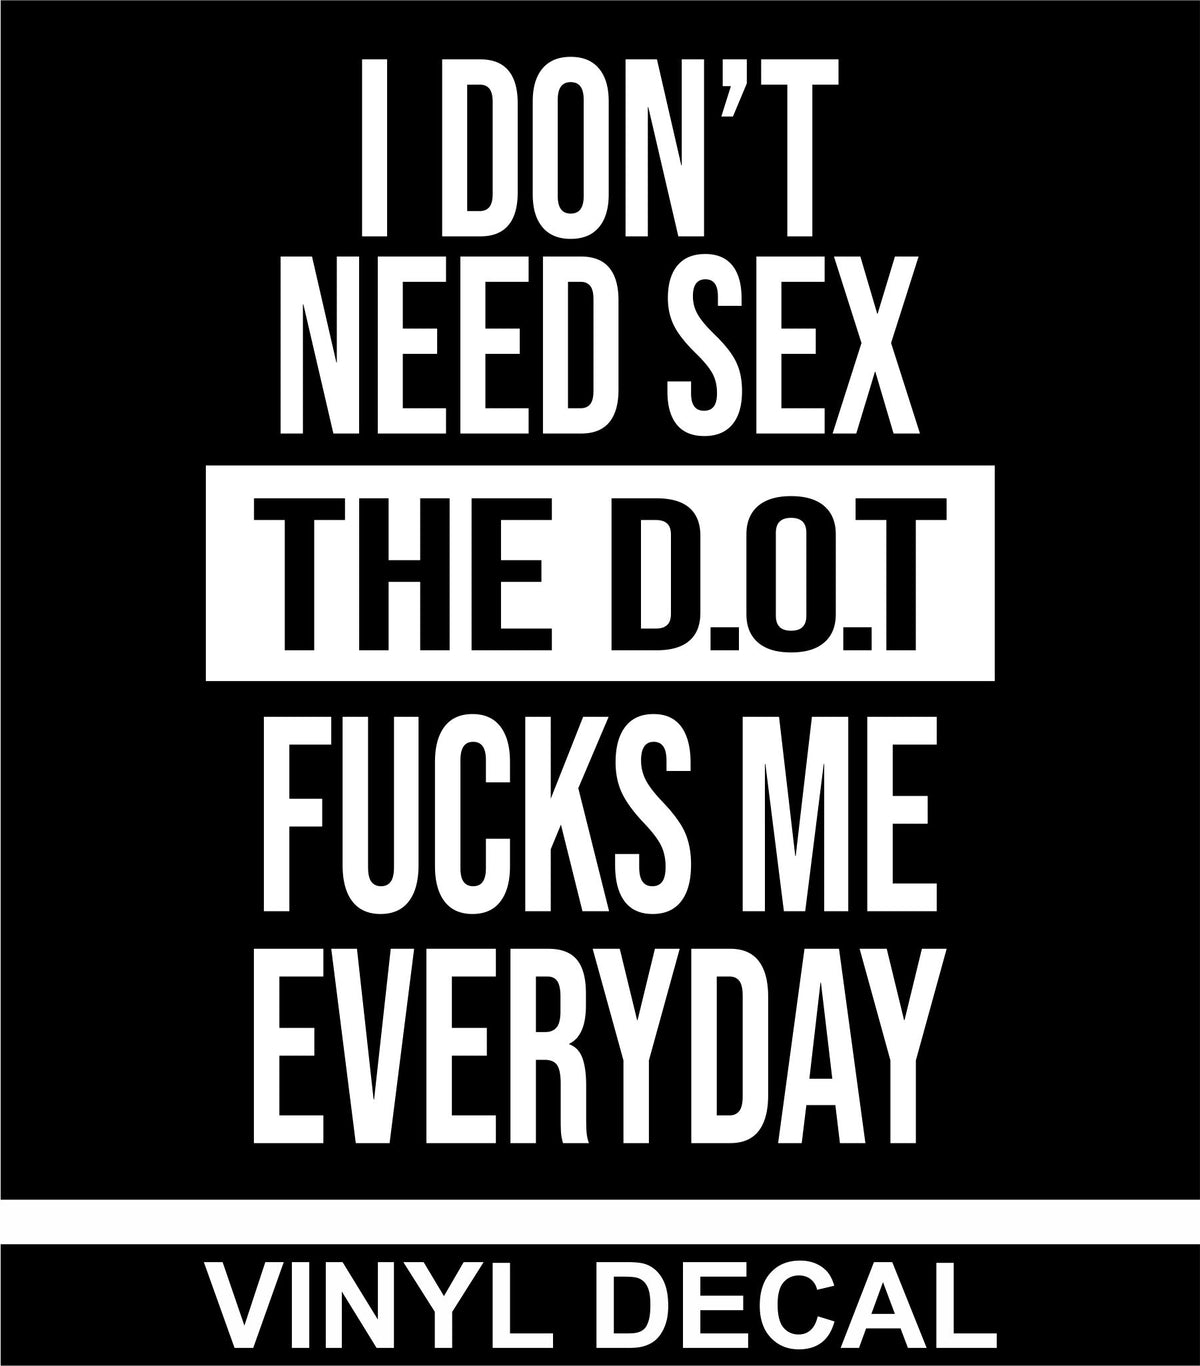 I Don't Need Sex - The D.O.T - Vinyl Decal - Free Shipping